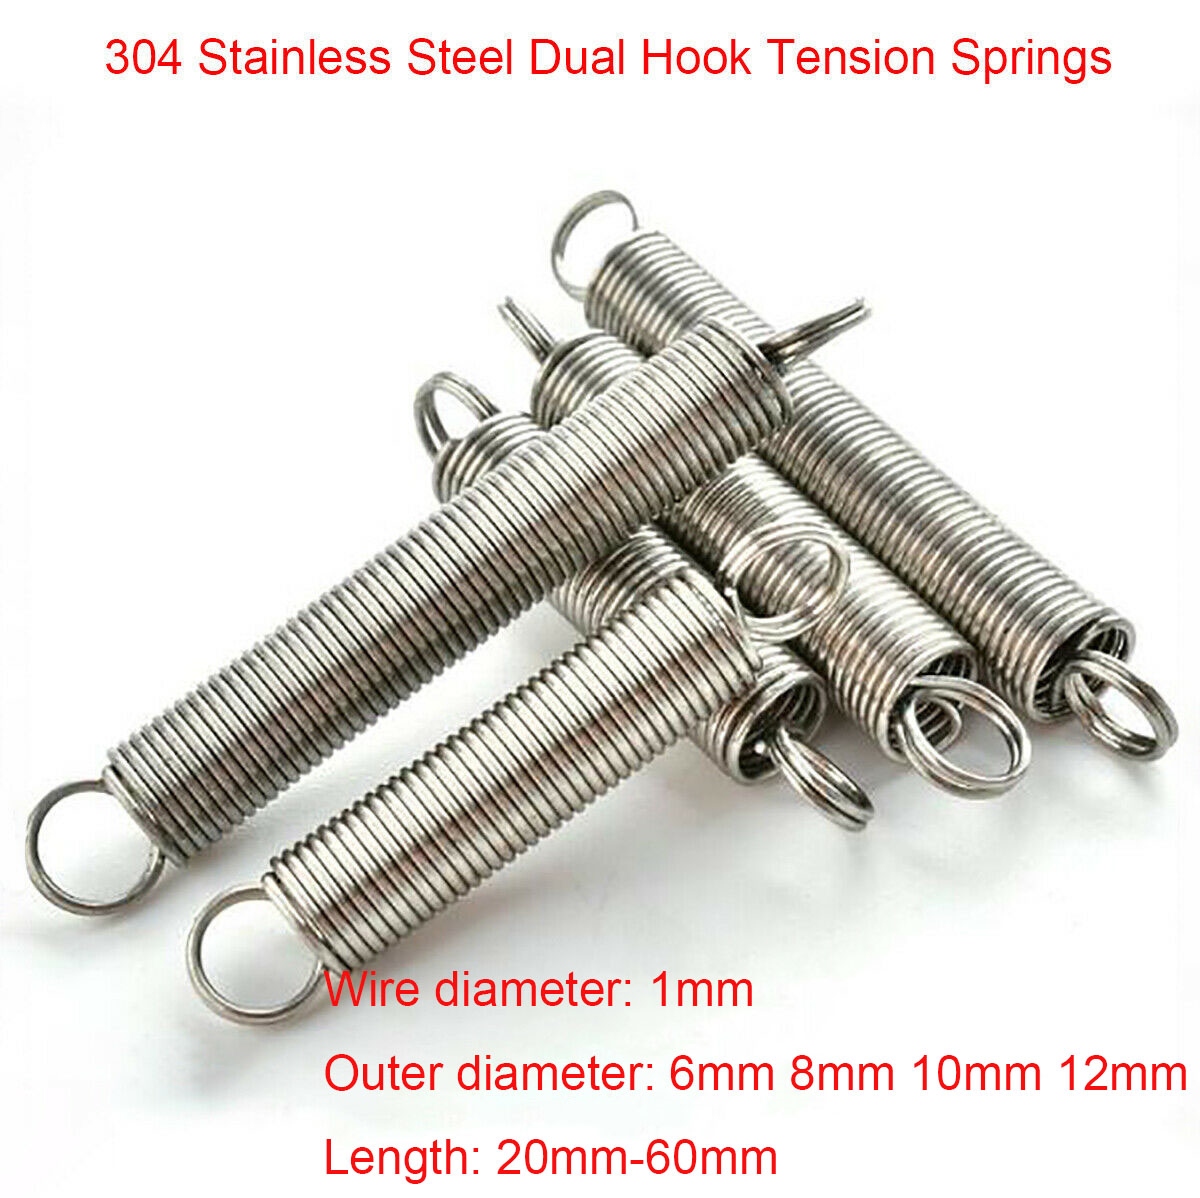 Double Wires Tension Extension Spring Wire Dia 1.0mm 1.2mm A2 Stainless Steel 